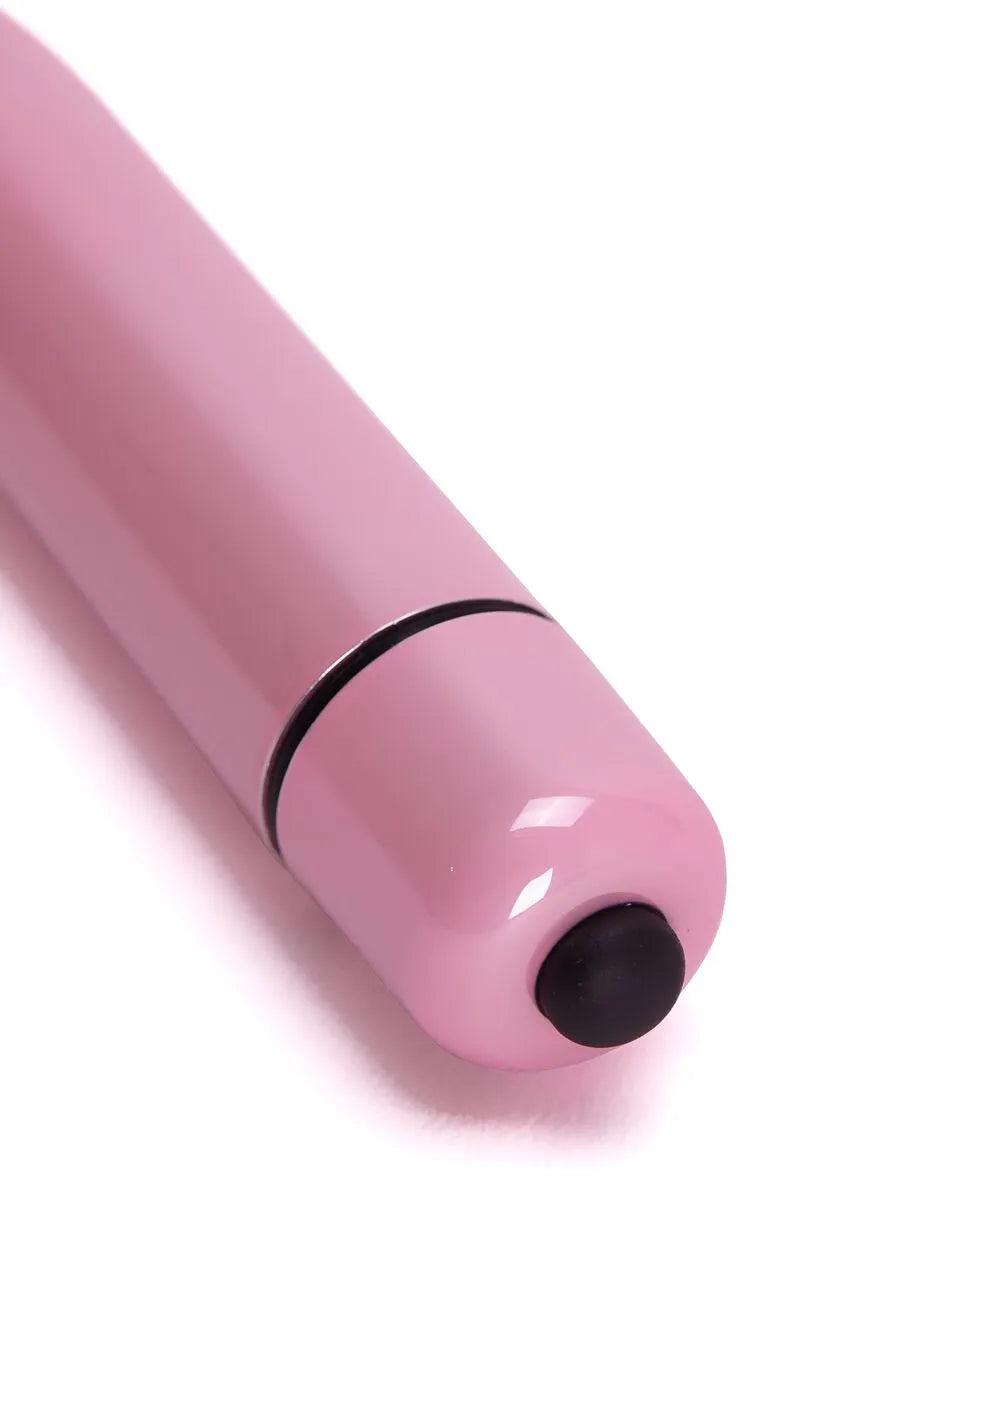 3 Speed Bullet Vibrator Pink From Ann Summers, Image 2